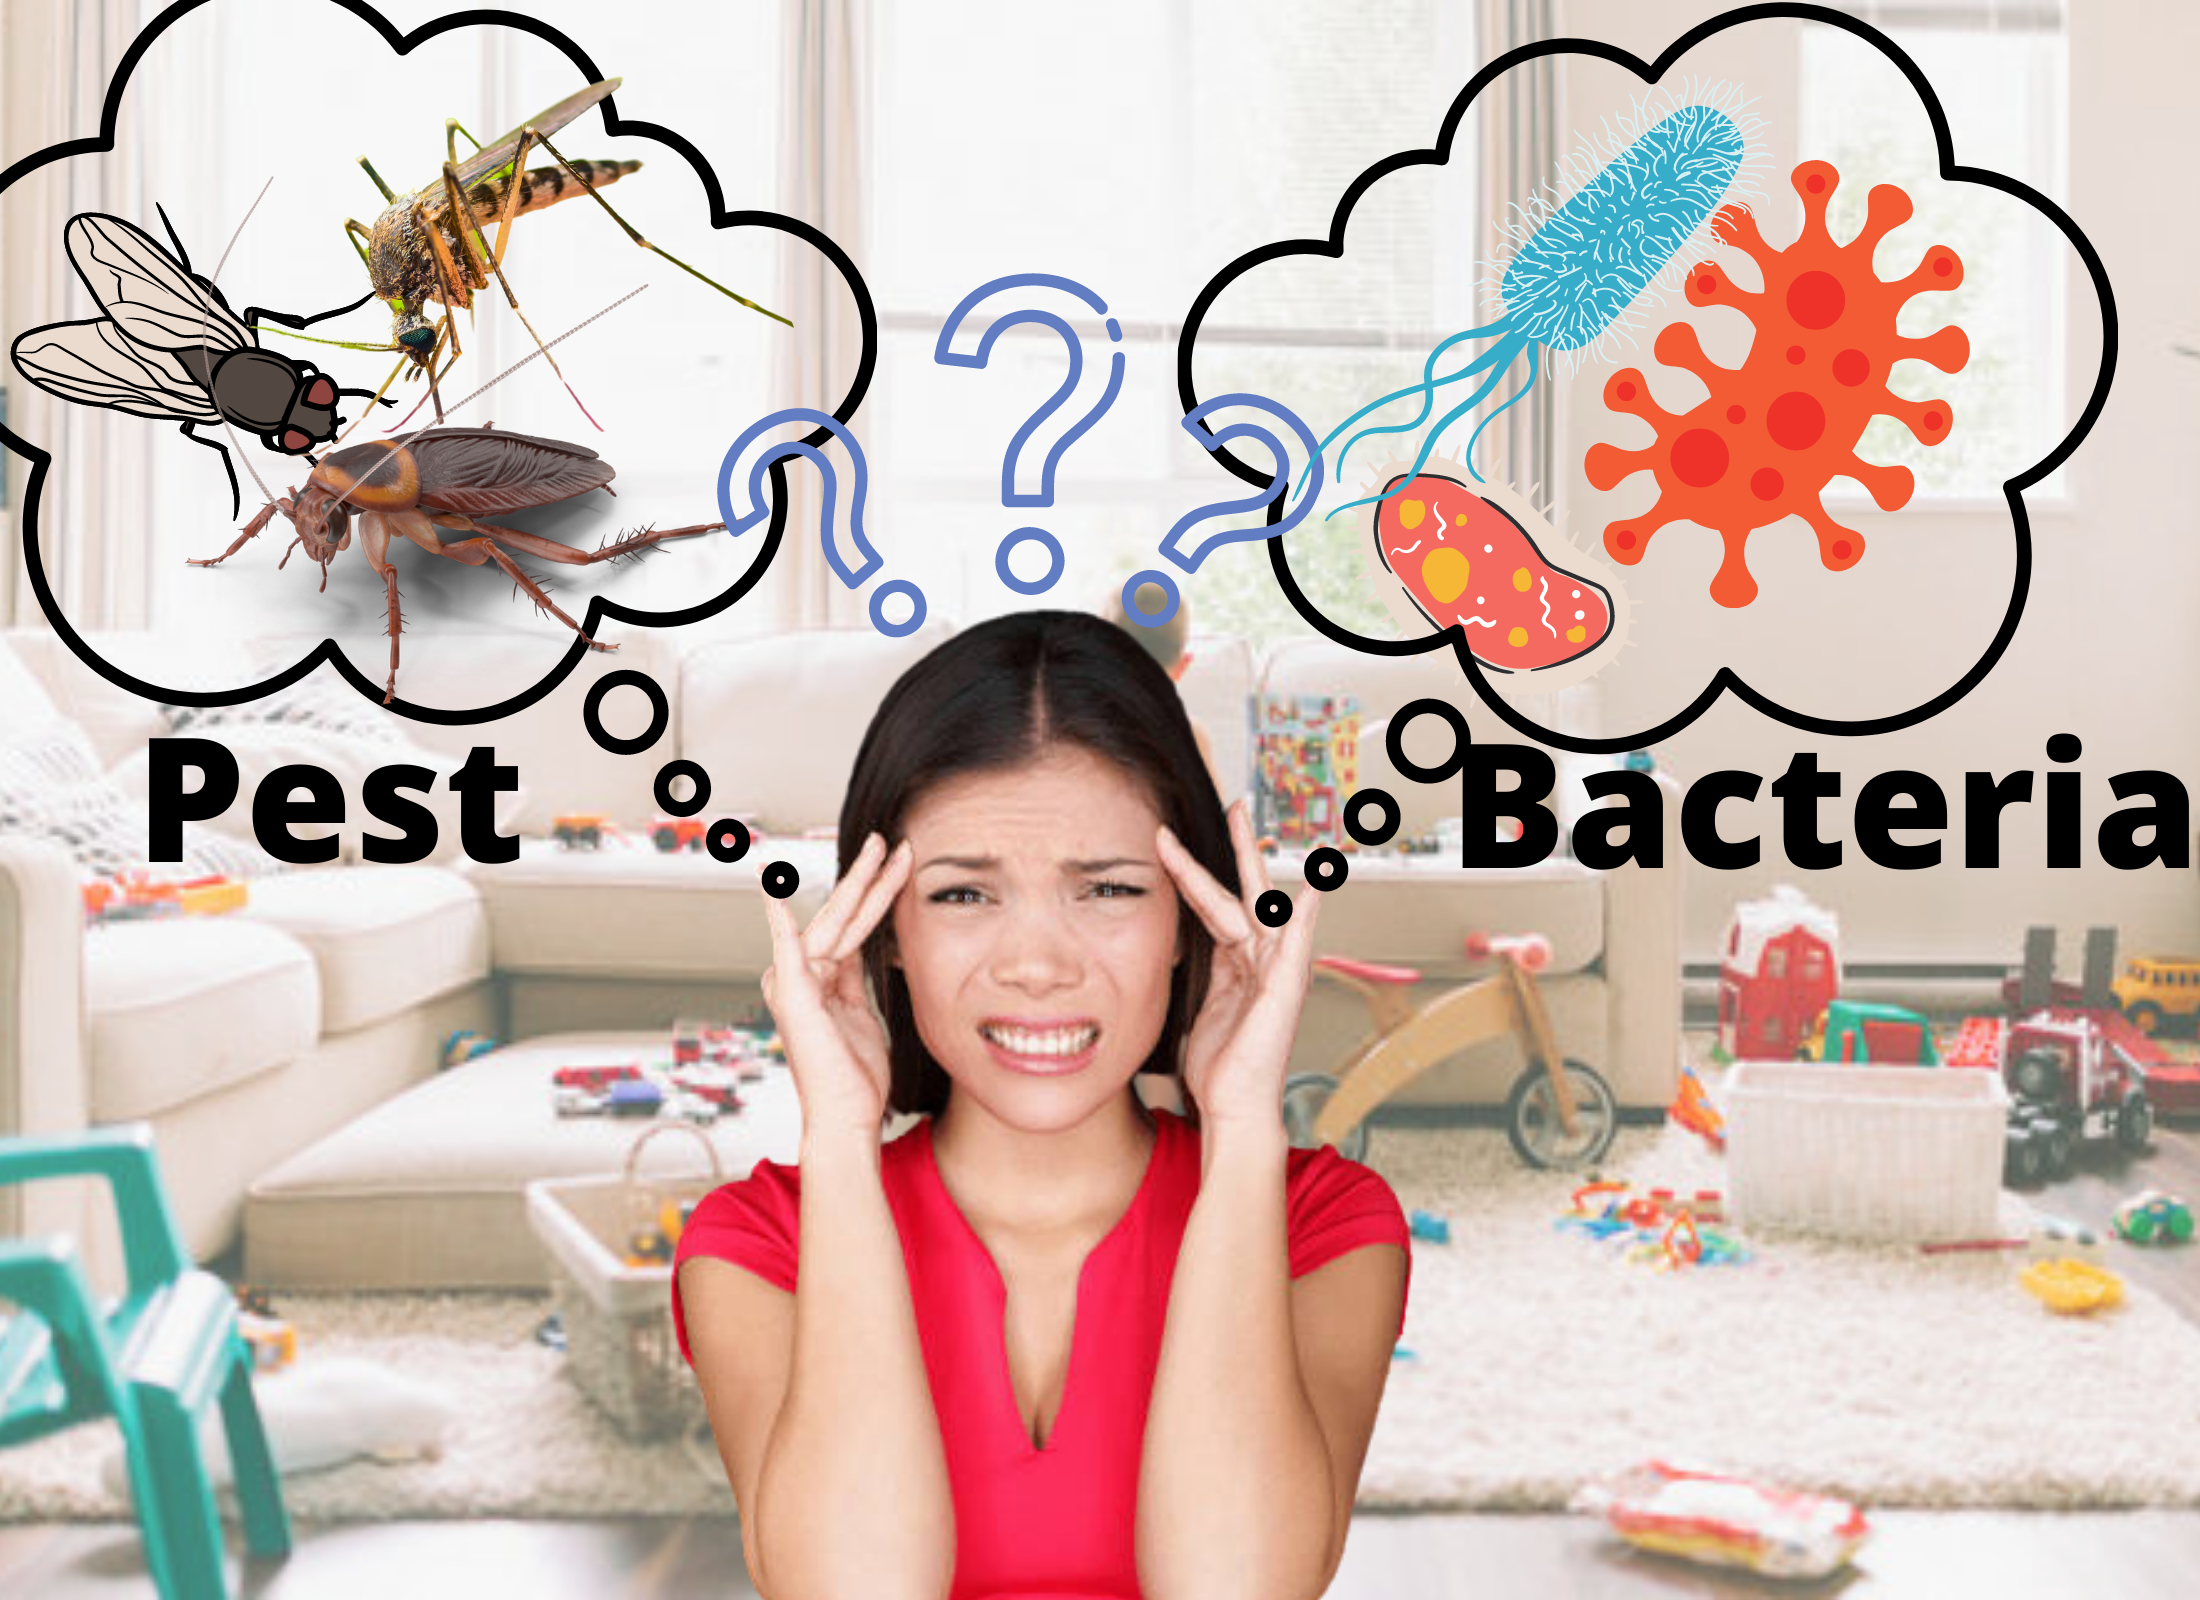 Why house fly, mosquito, and cockroach are different from bacteria?